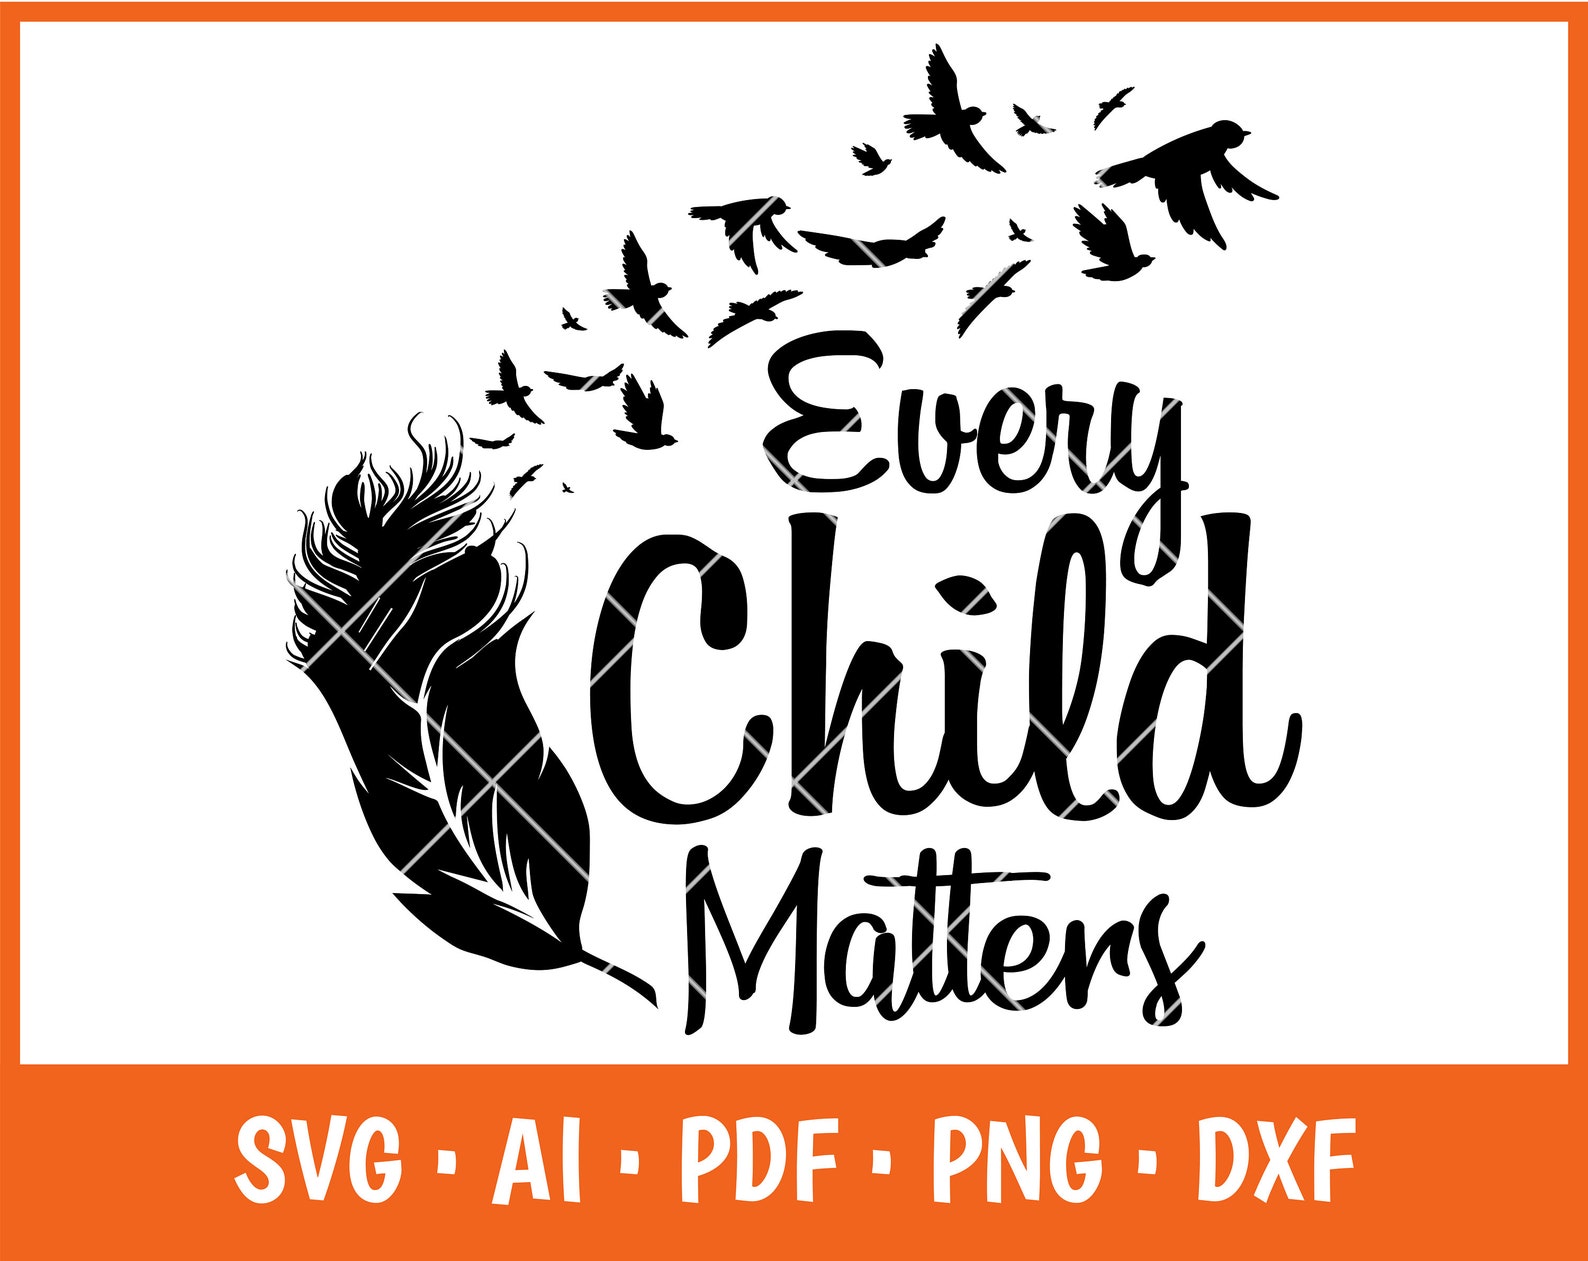 Every child matters svg save our children feather svg | Etsy